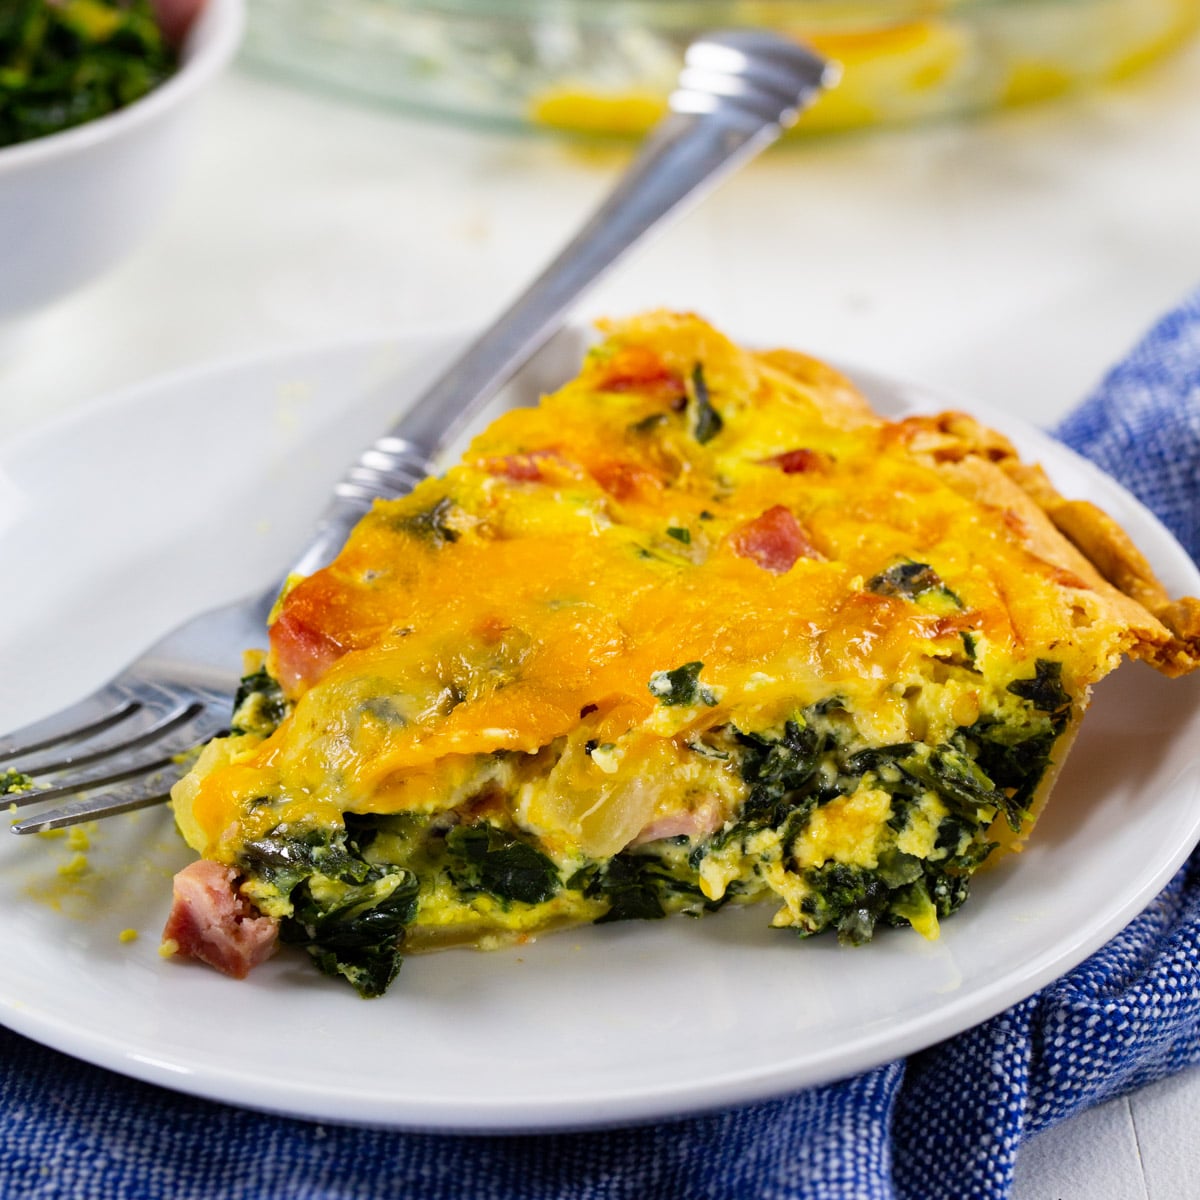 Slice of Collard Greens Quiche on a plate.